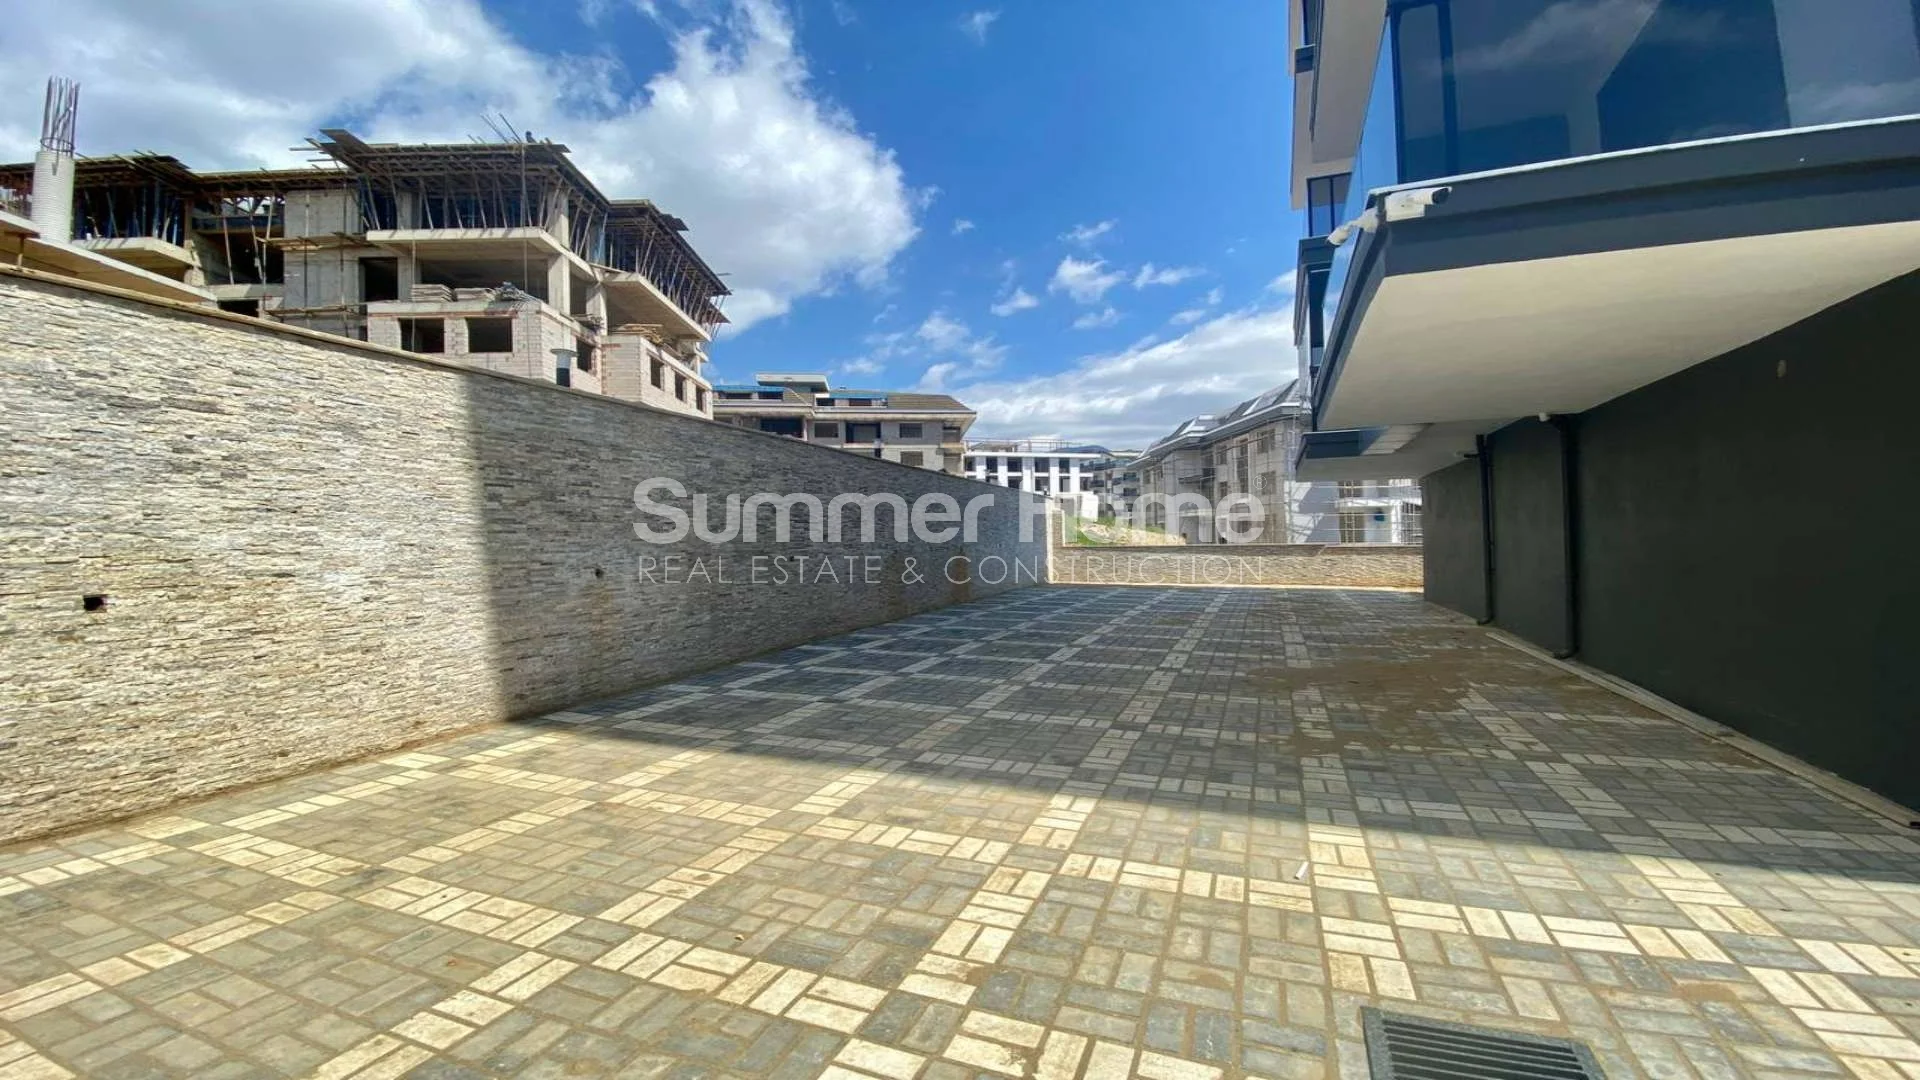 For sale Apartment Alanya Oba Facilities - 13